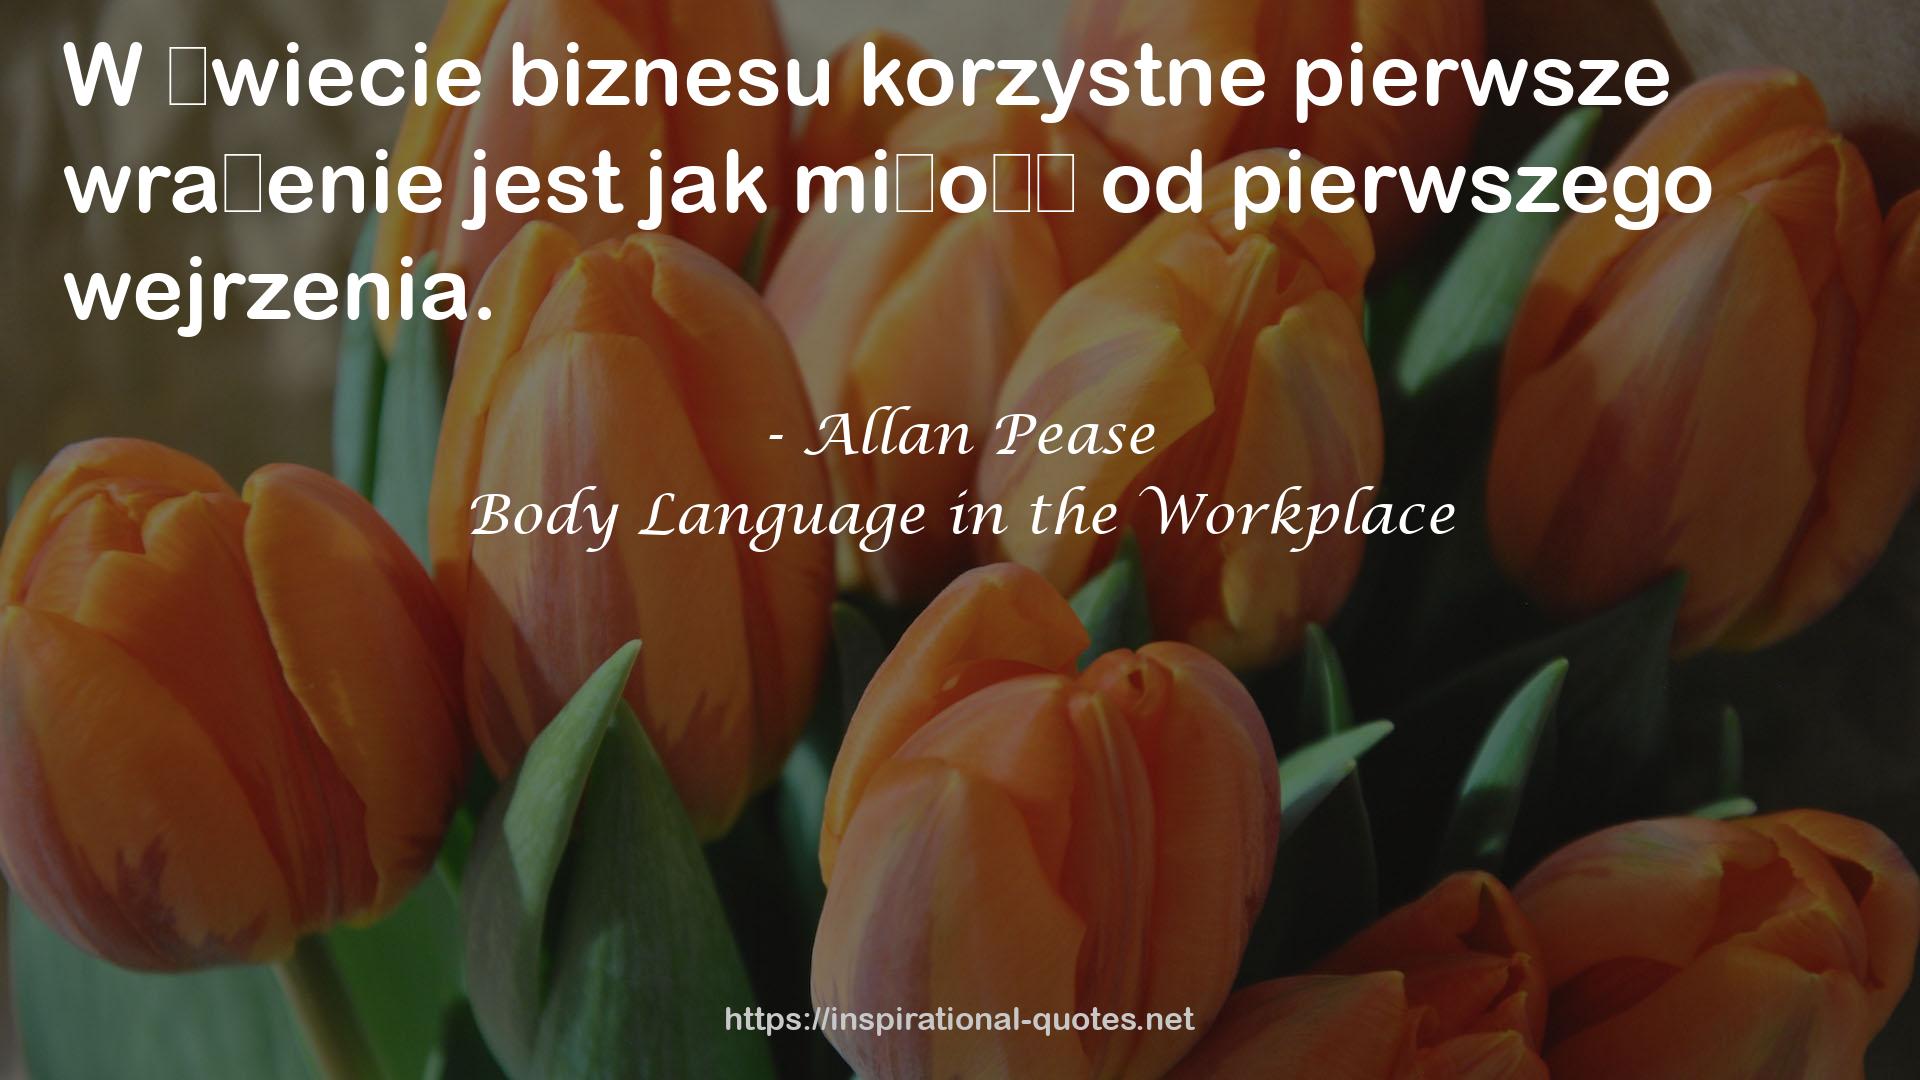 Body Language in the Workplace QUOTES